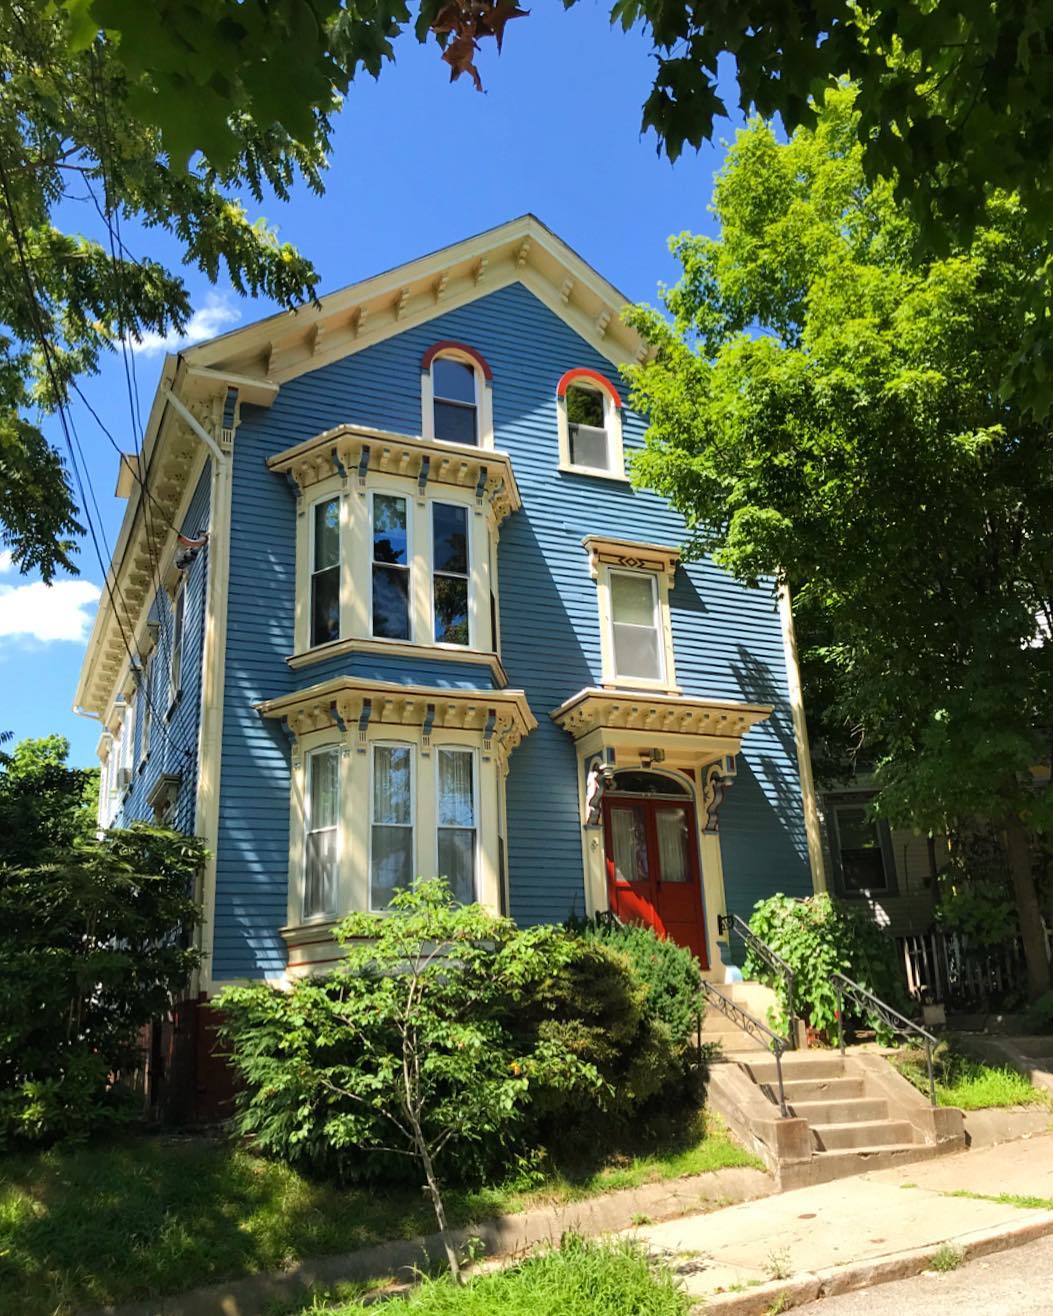 Victorian home in Mount Hope neighborhood of Providence. Photo by Instagram user @seaofsteps.